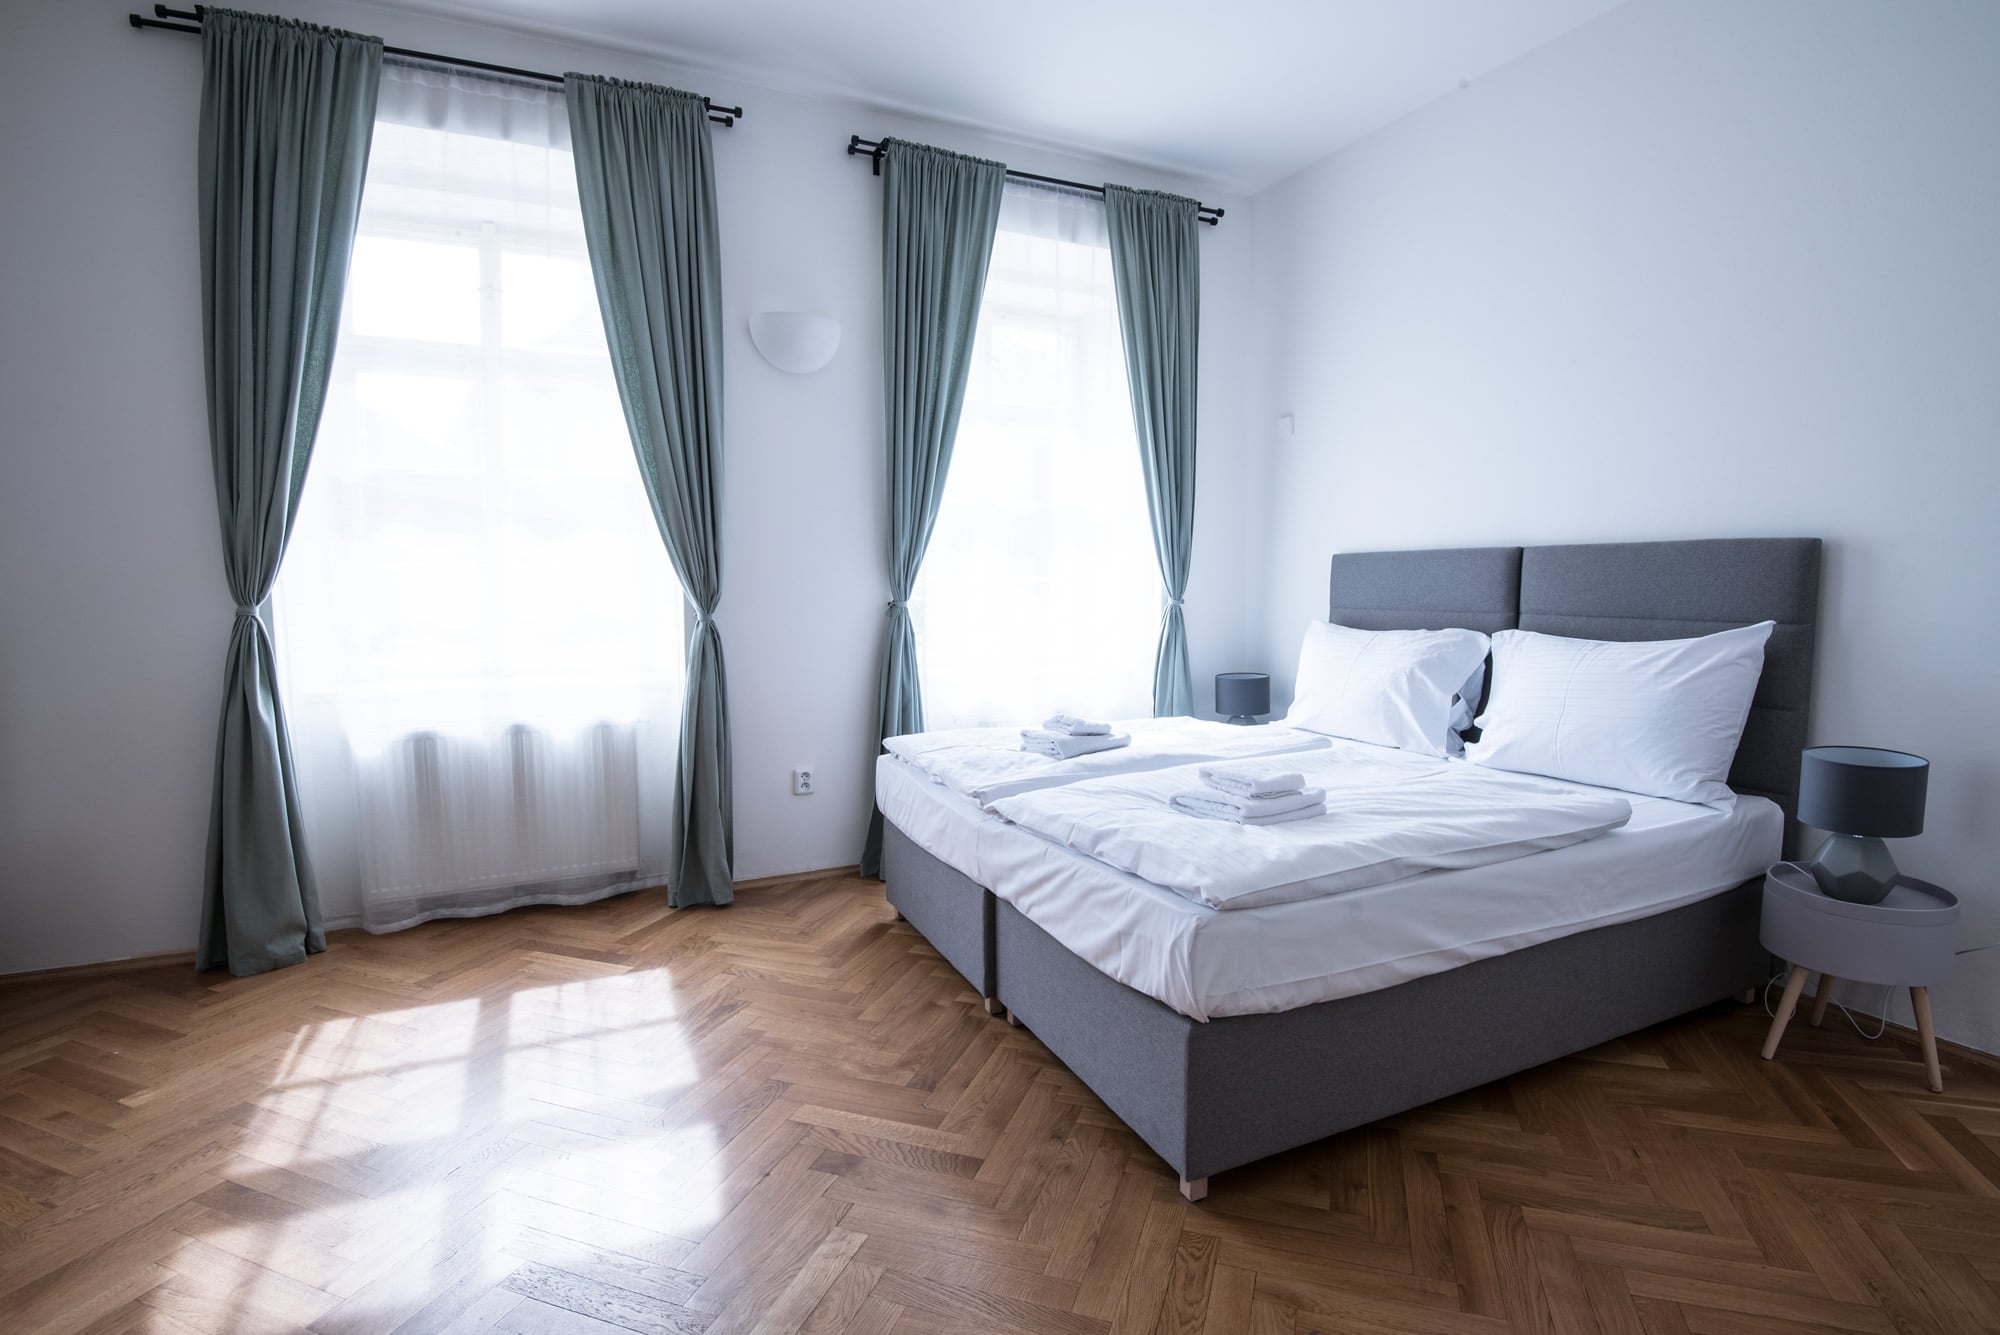 Bedroom with grey king sized bed and white bed sheets. Wooden parquet is on the floor, grey curtains are by the windows.